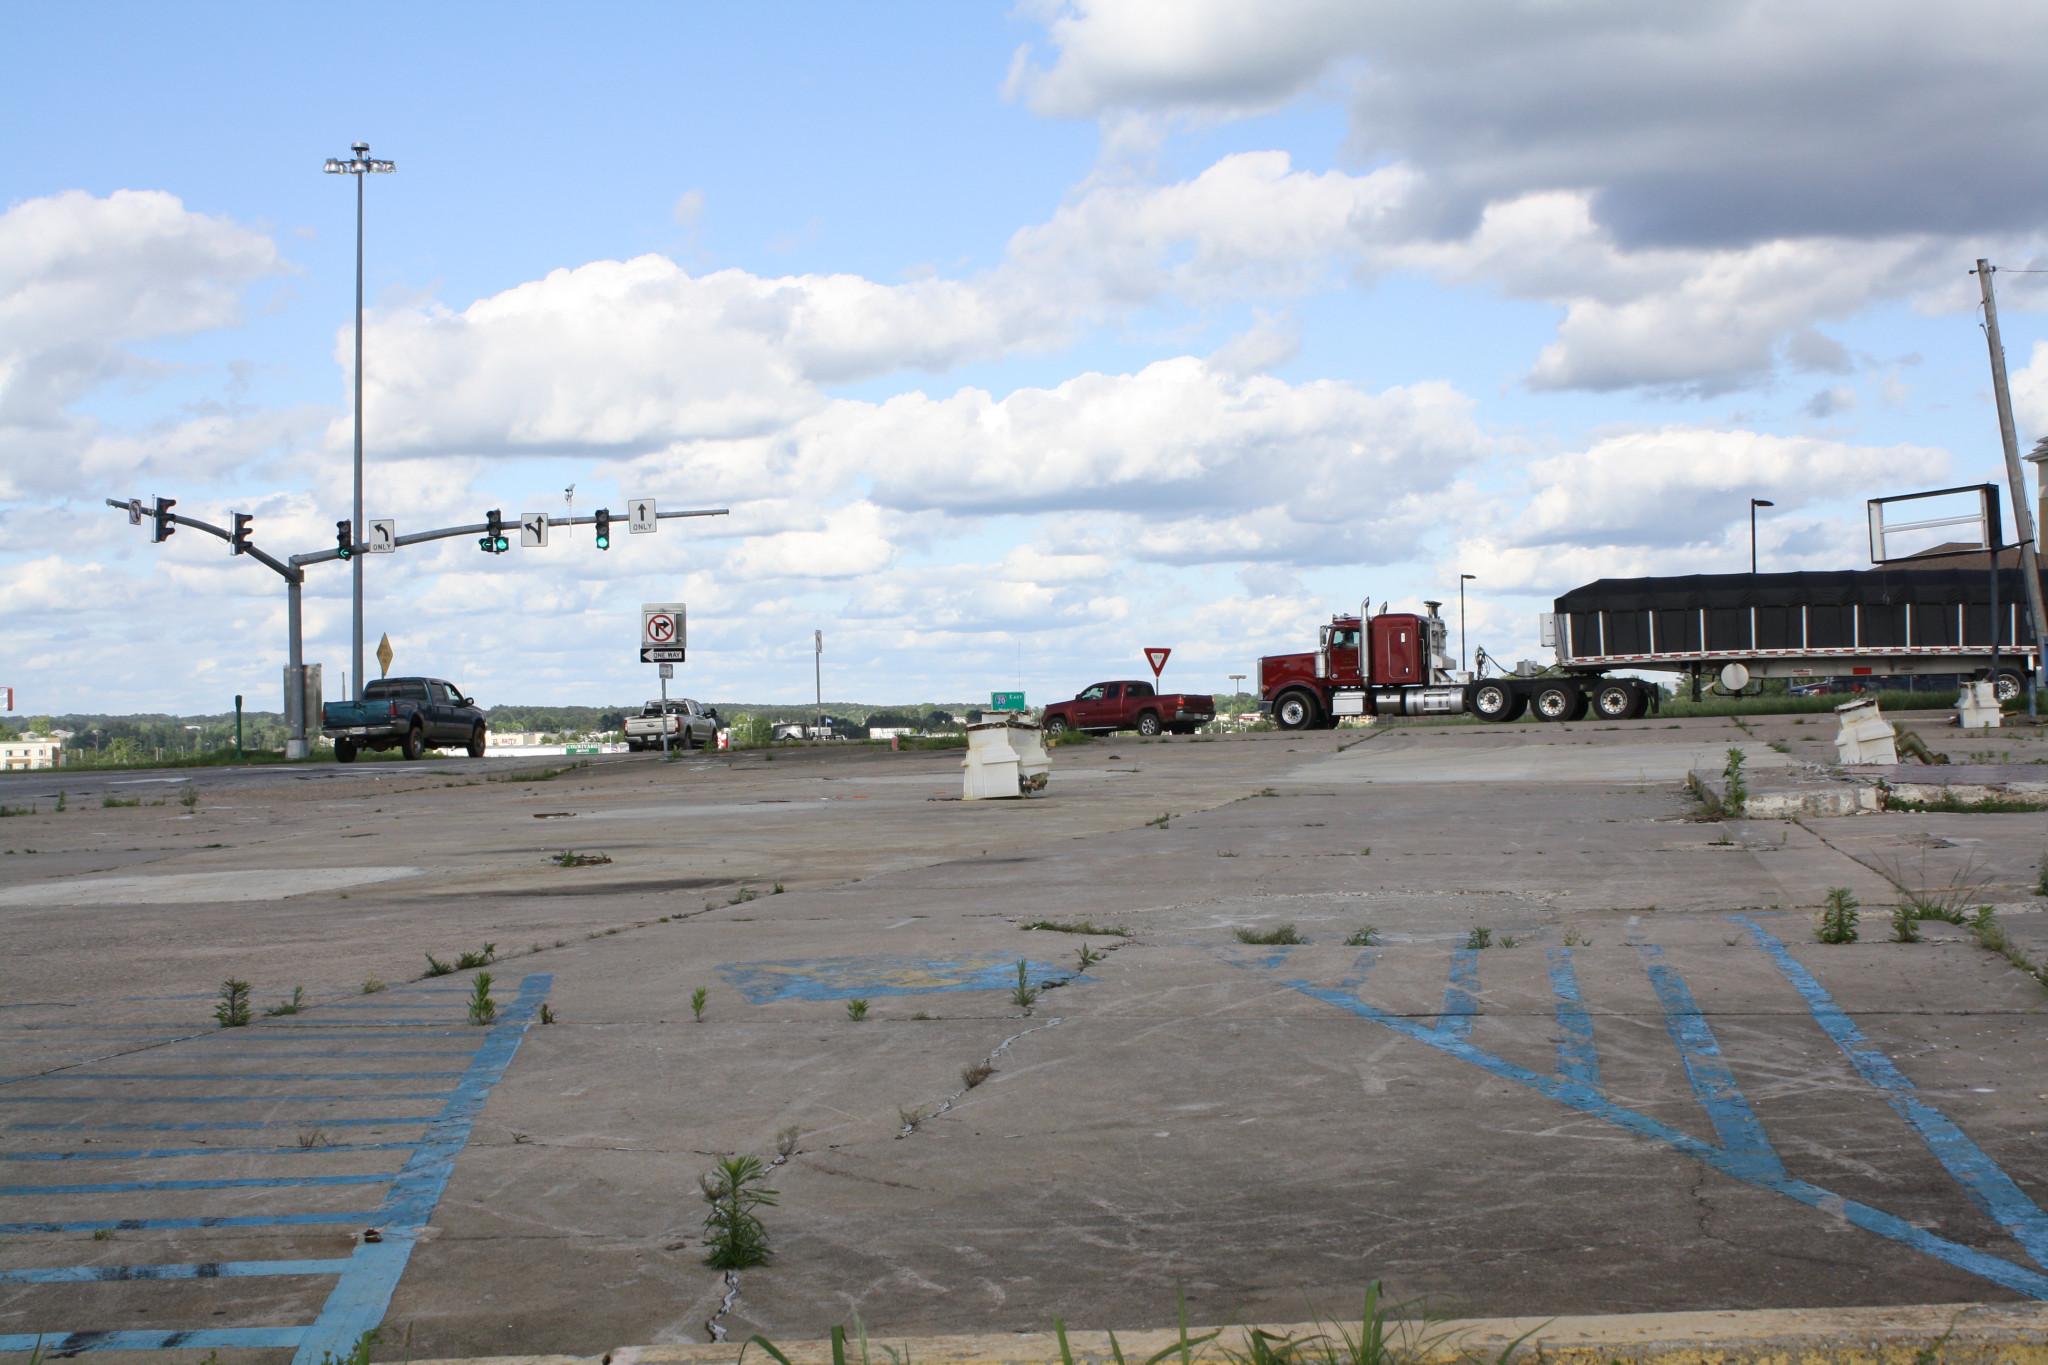 The current state of the empty lot where the Pow-Wow once stood.